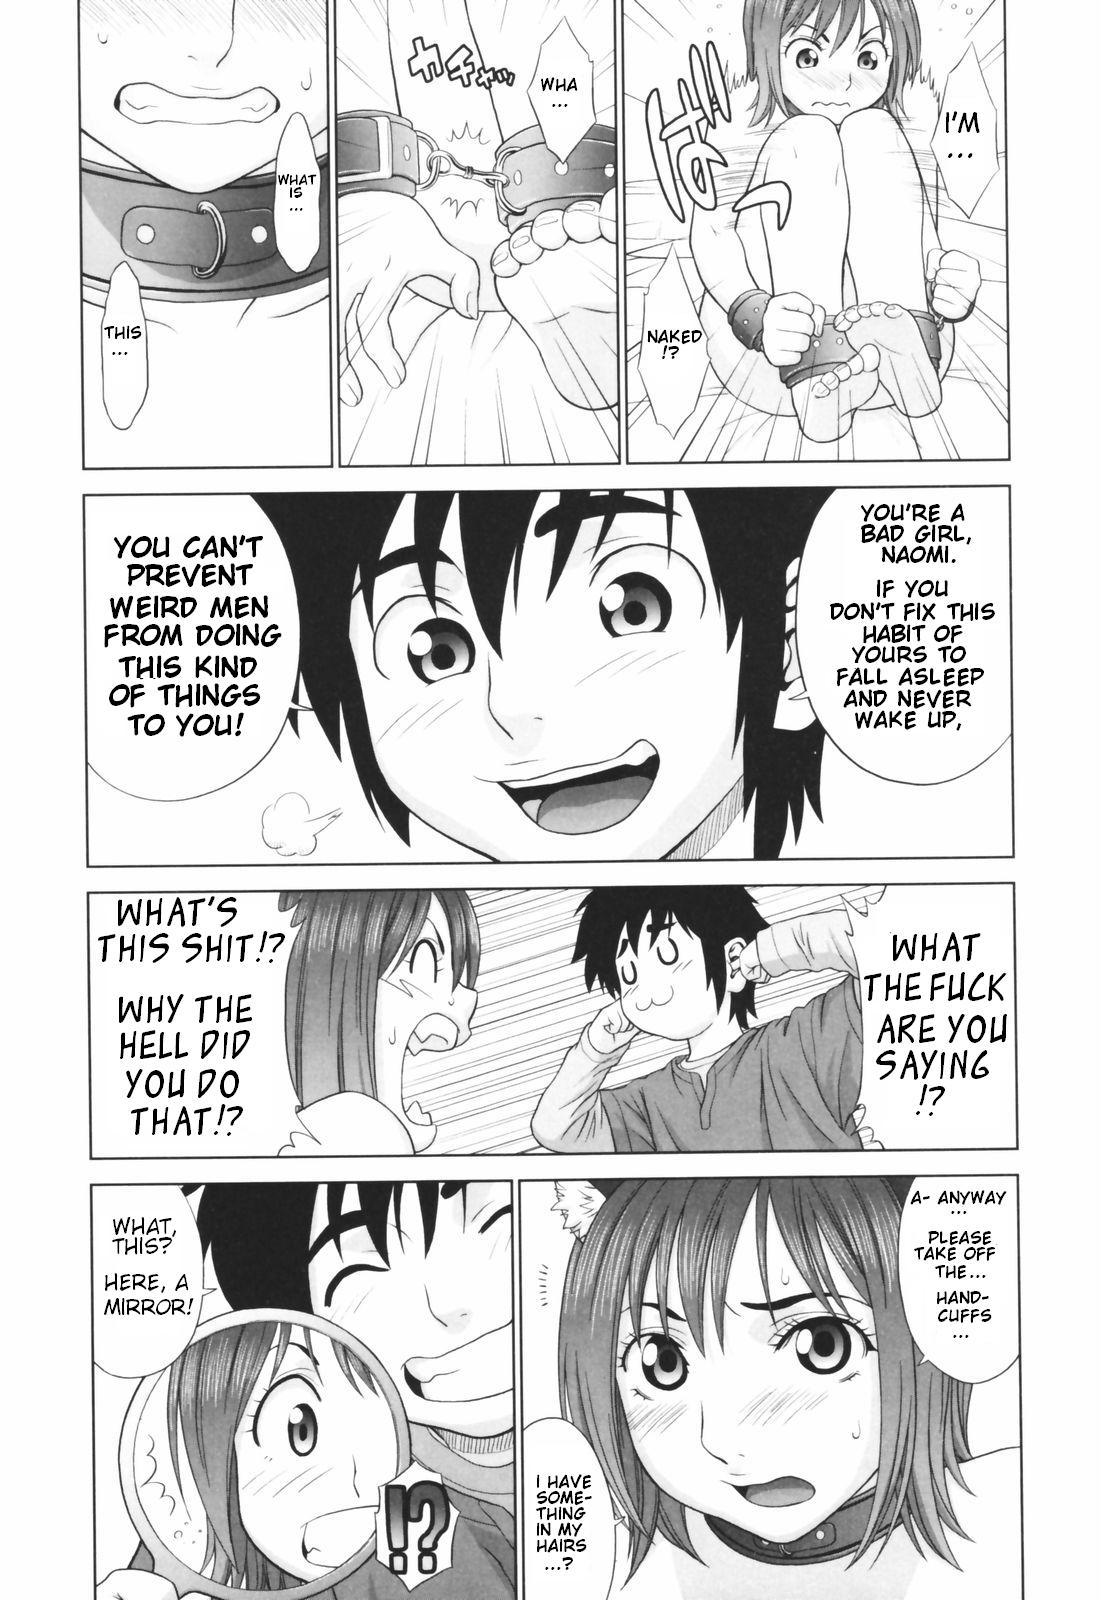 Bizarre The Coming of Ryouta - First and Second Coming Humiliation - Page 7